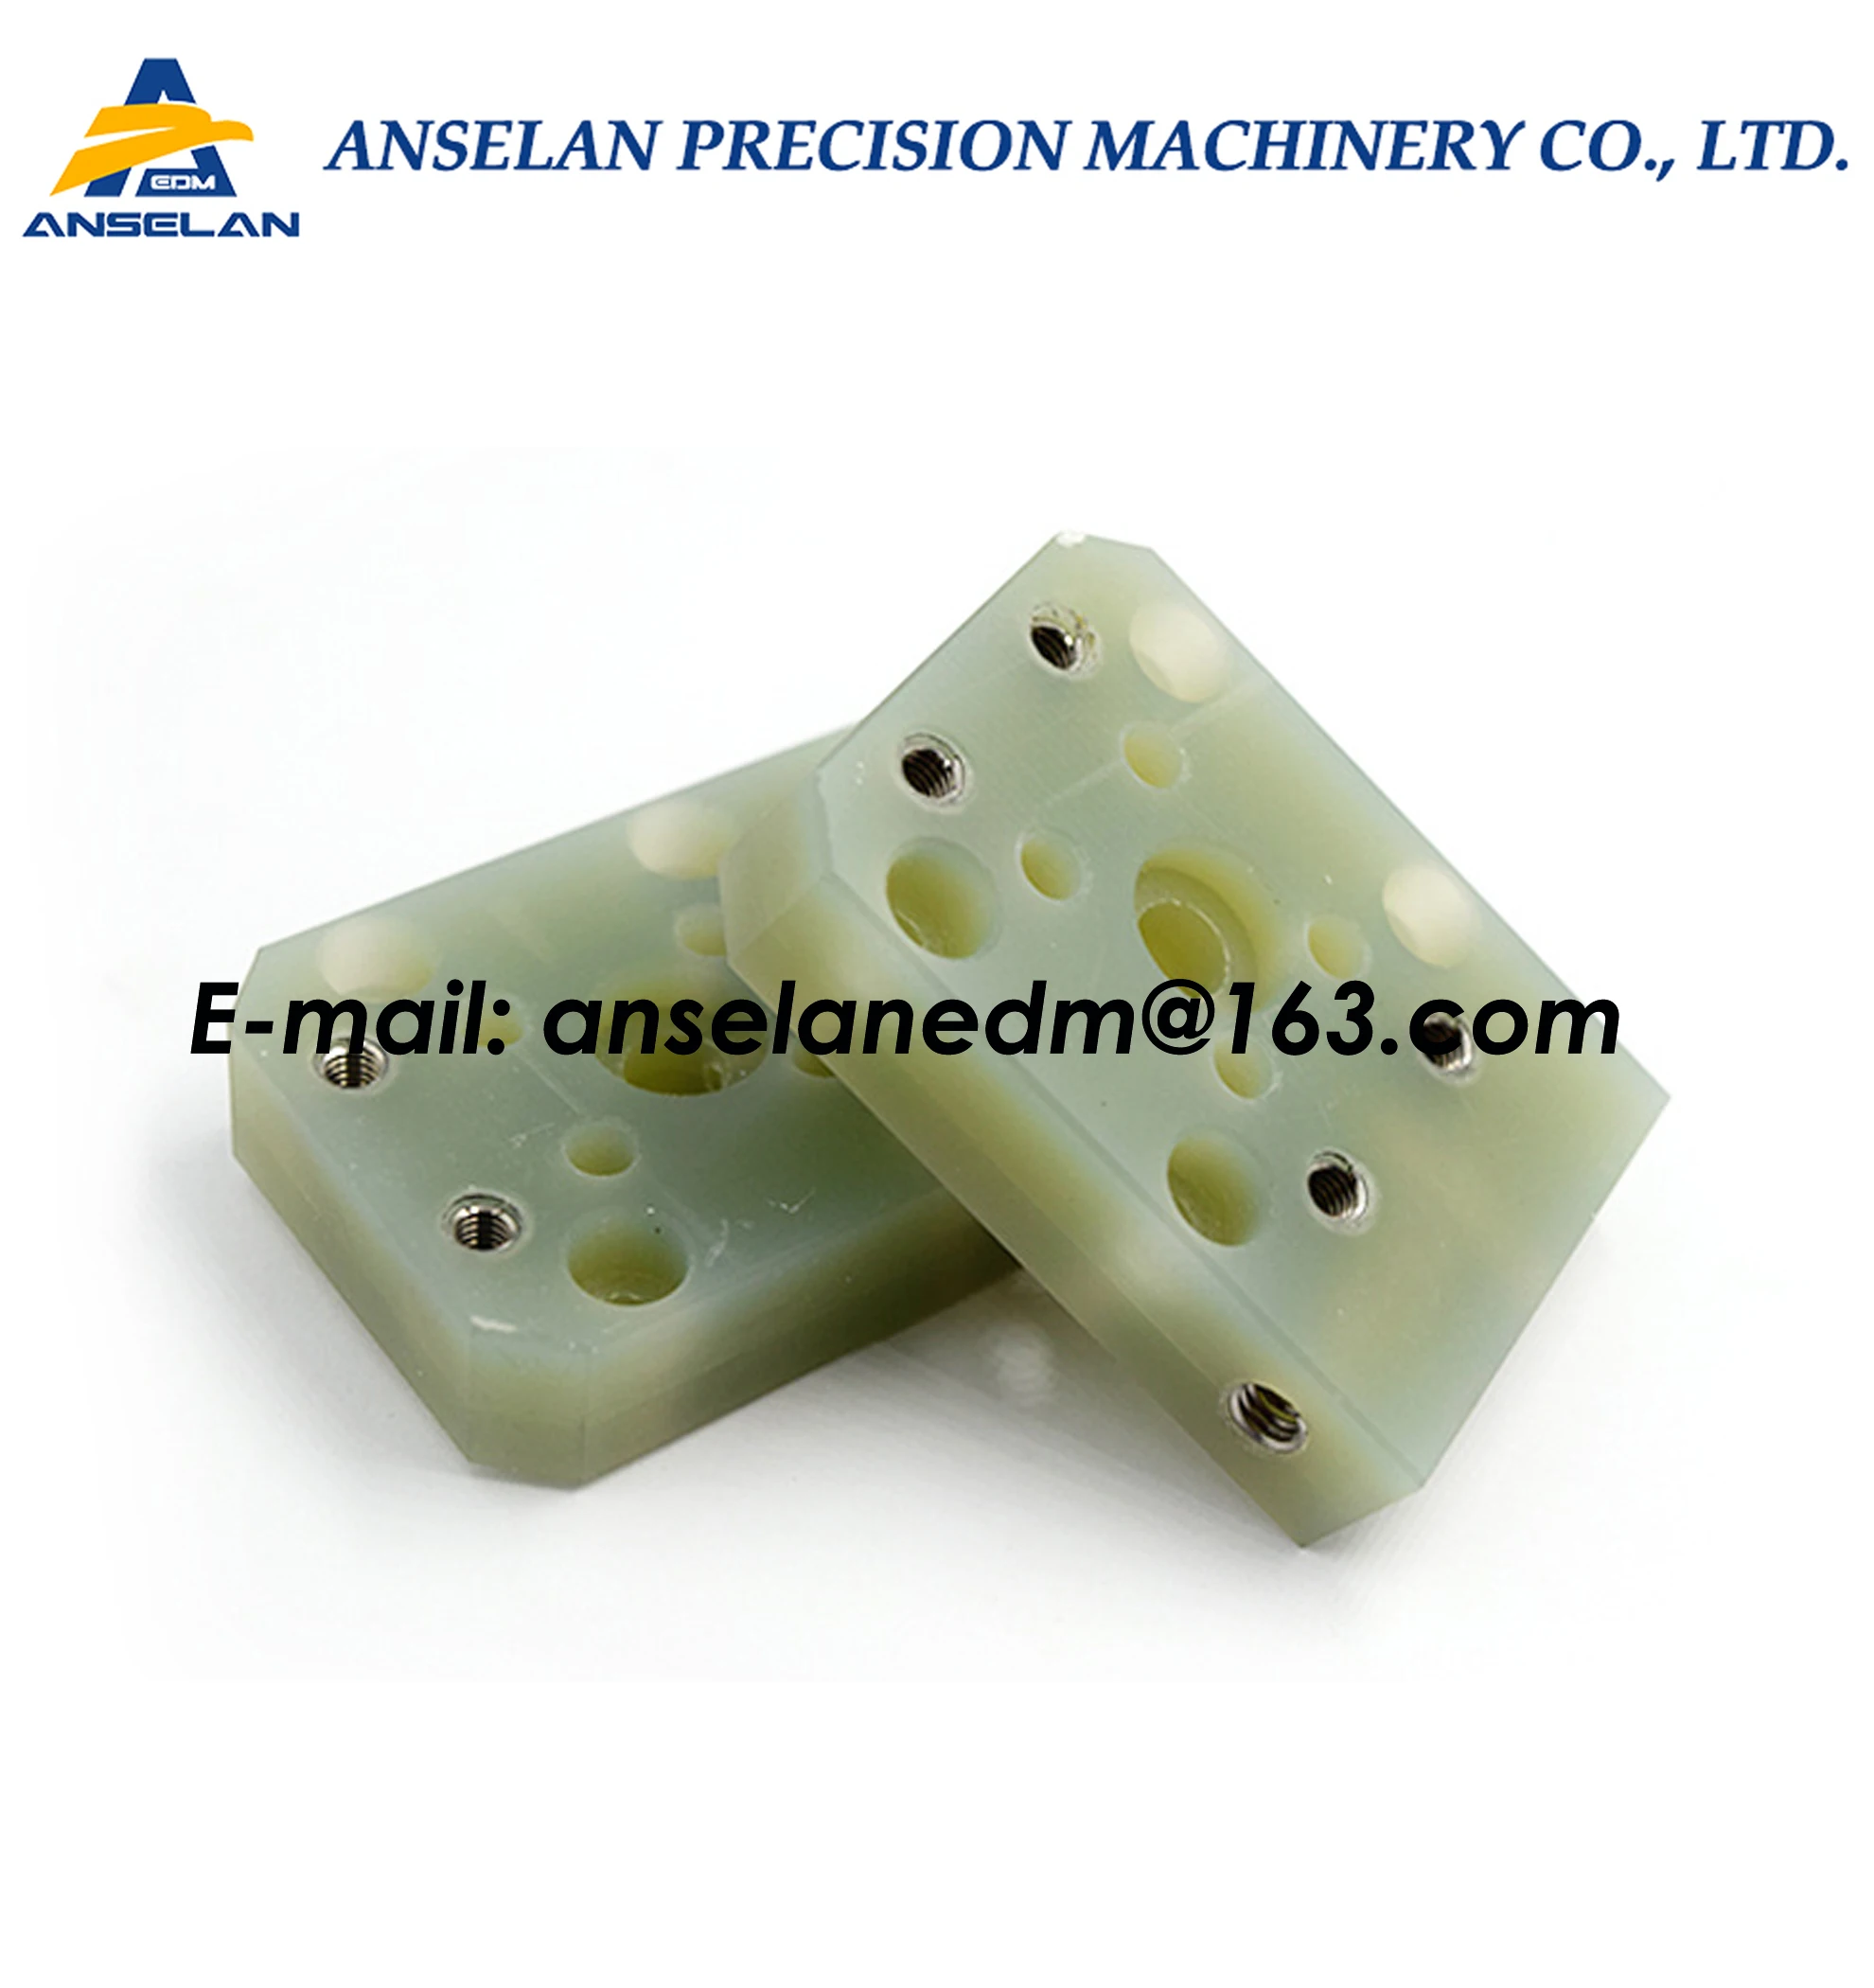 A290-8119-X764 Isolation Plate Lower 56x40x13t for 0iD,0iDDP machine. edm wear parts A290.8119.X764, A2908119X764 Isolator Plate